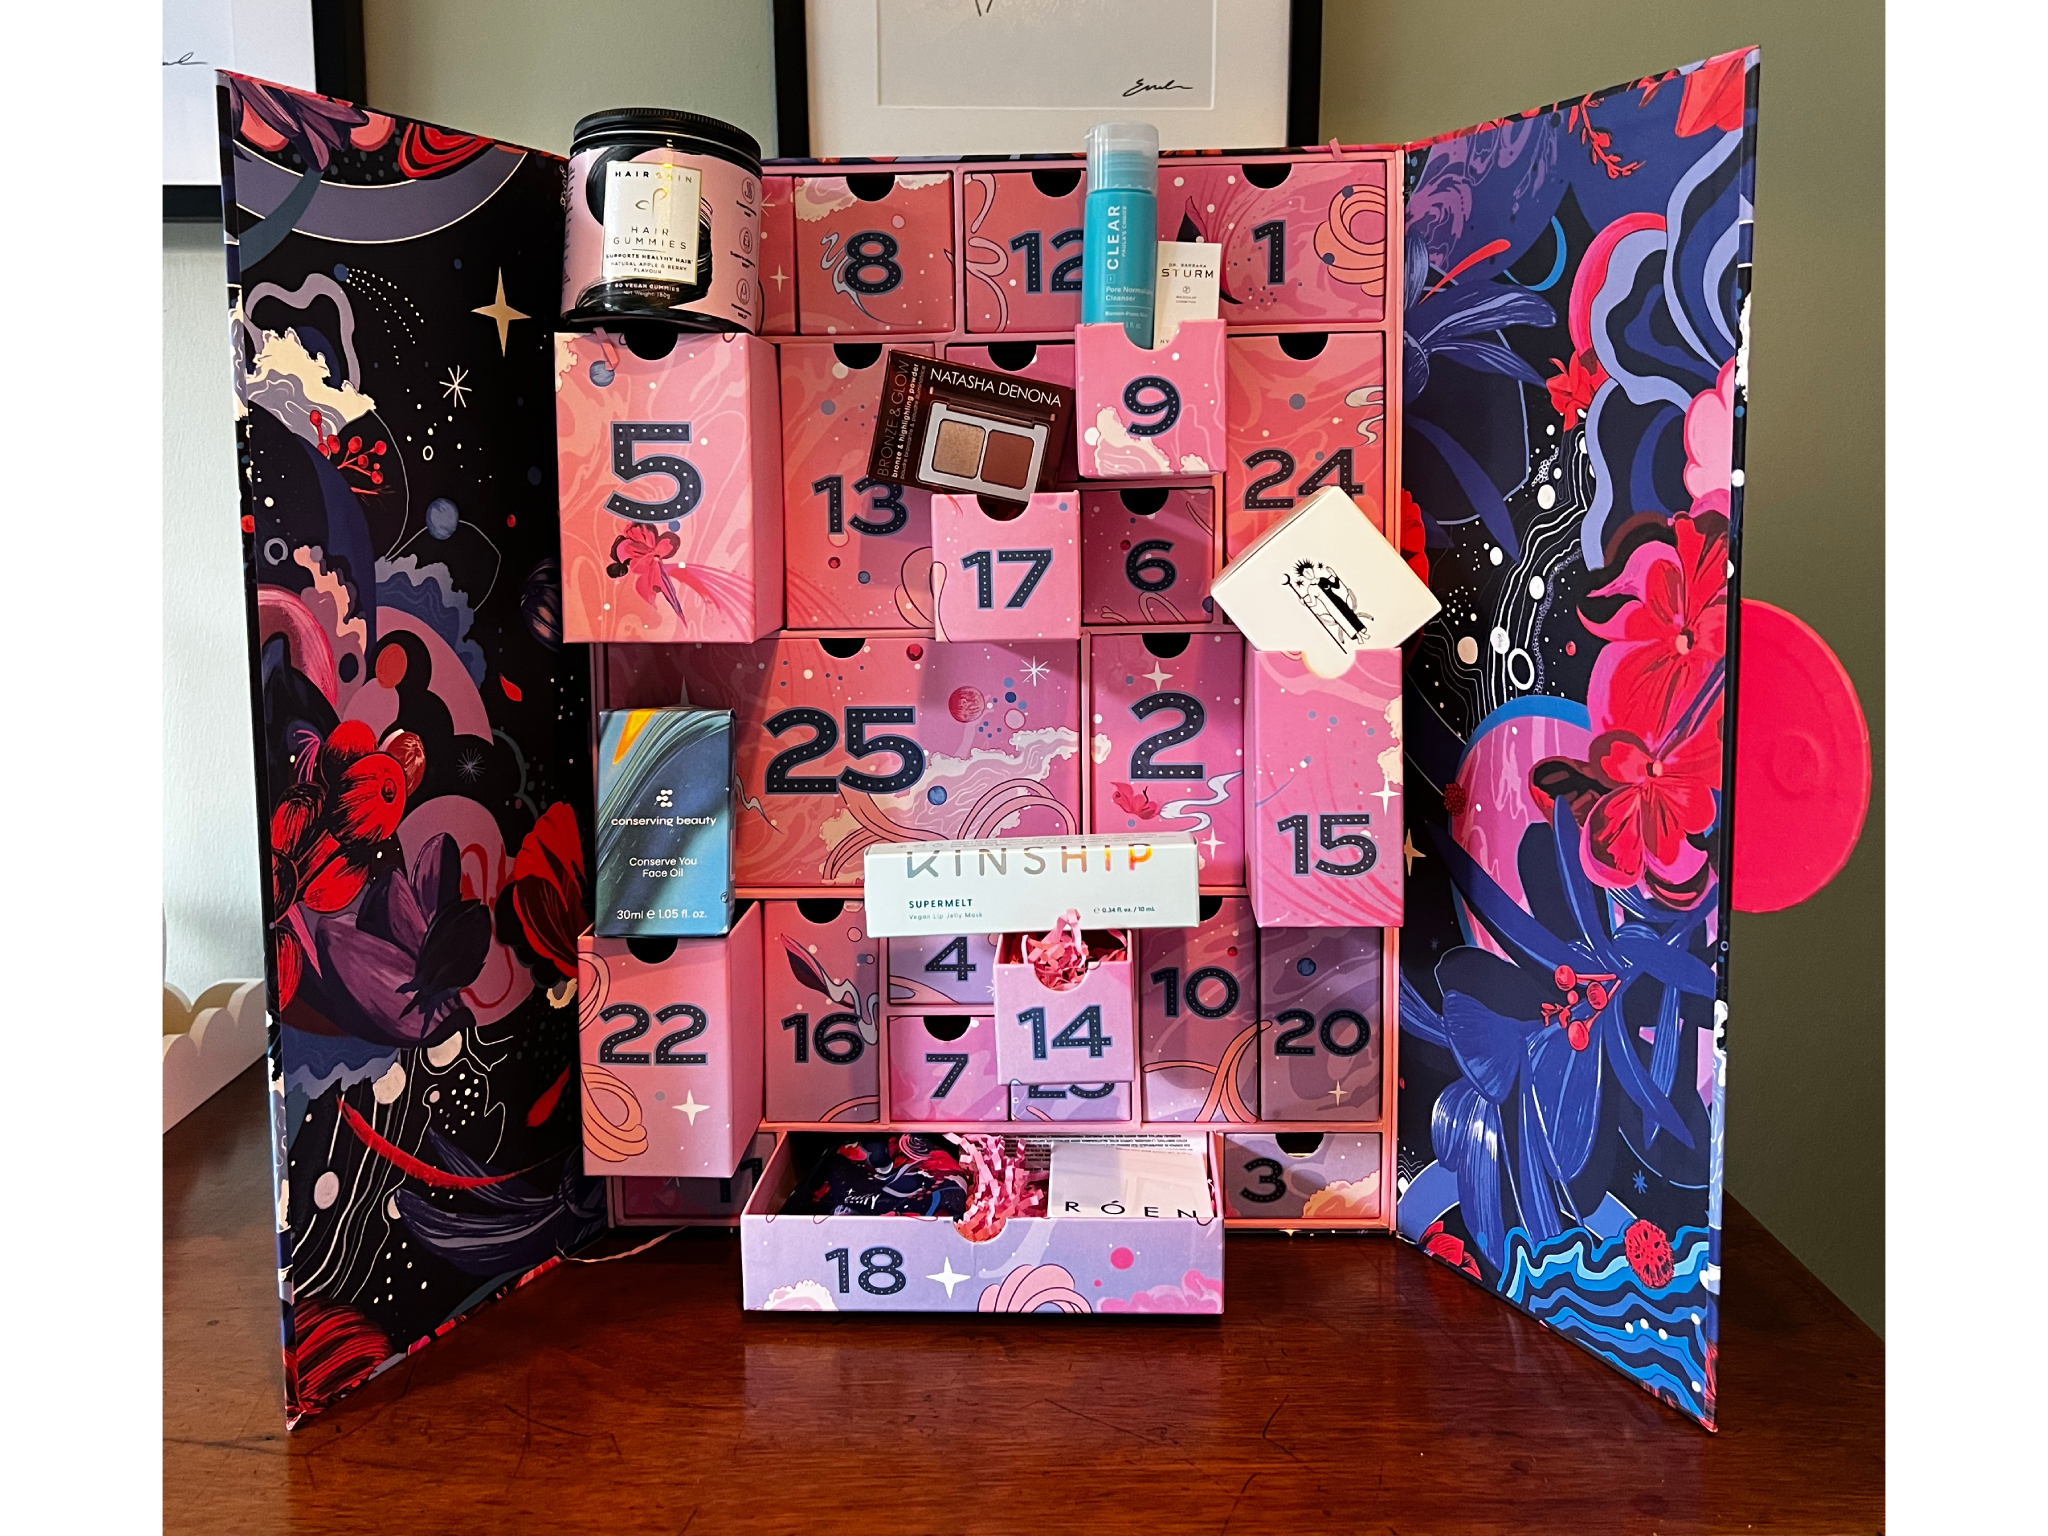 The Cult Beauty advent calendar in all its glory